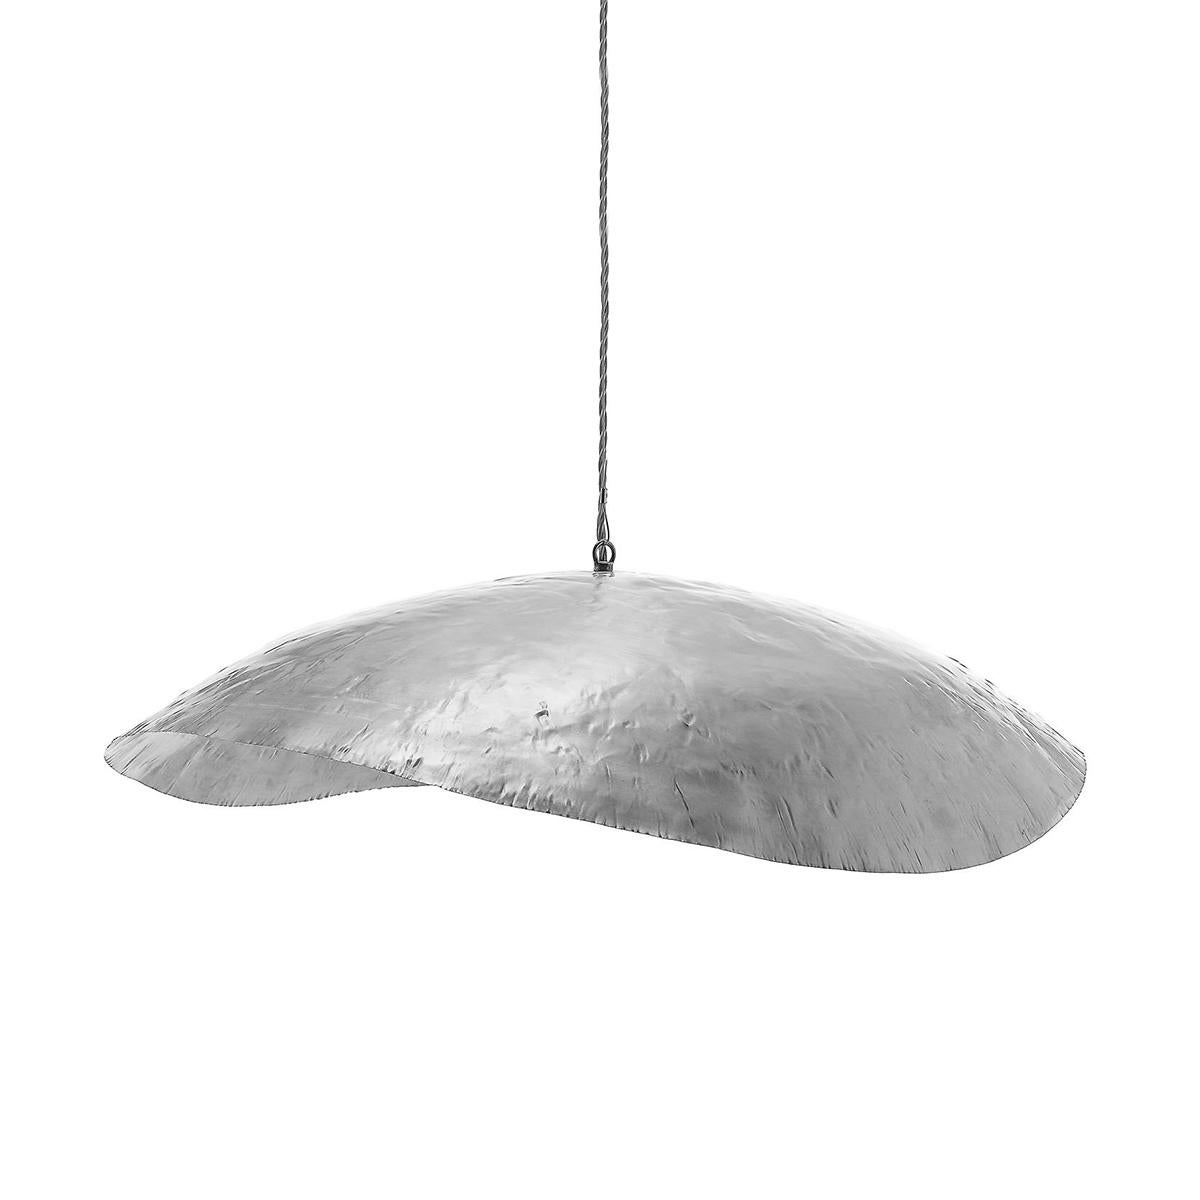 Suspension leaf silver medium all in matte
solid brass in nickel finish. 1 bulb, lamp holder
type E27, Max 18 Watt. 220 Voltage.
L 80 x D 70 x H 18cm. Electric cable in 250cm and
steel cable in 200cm. Price: 1090,00€.